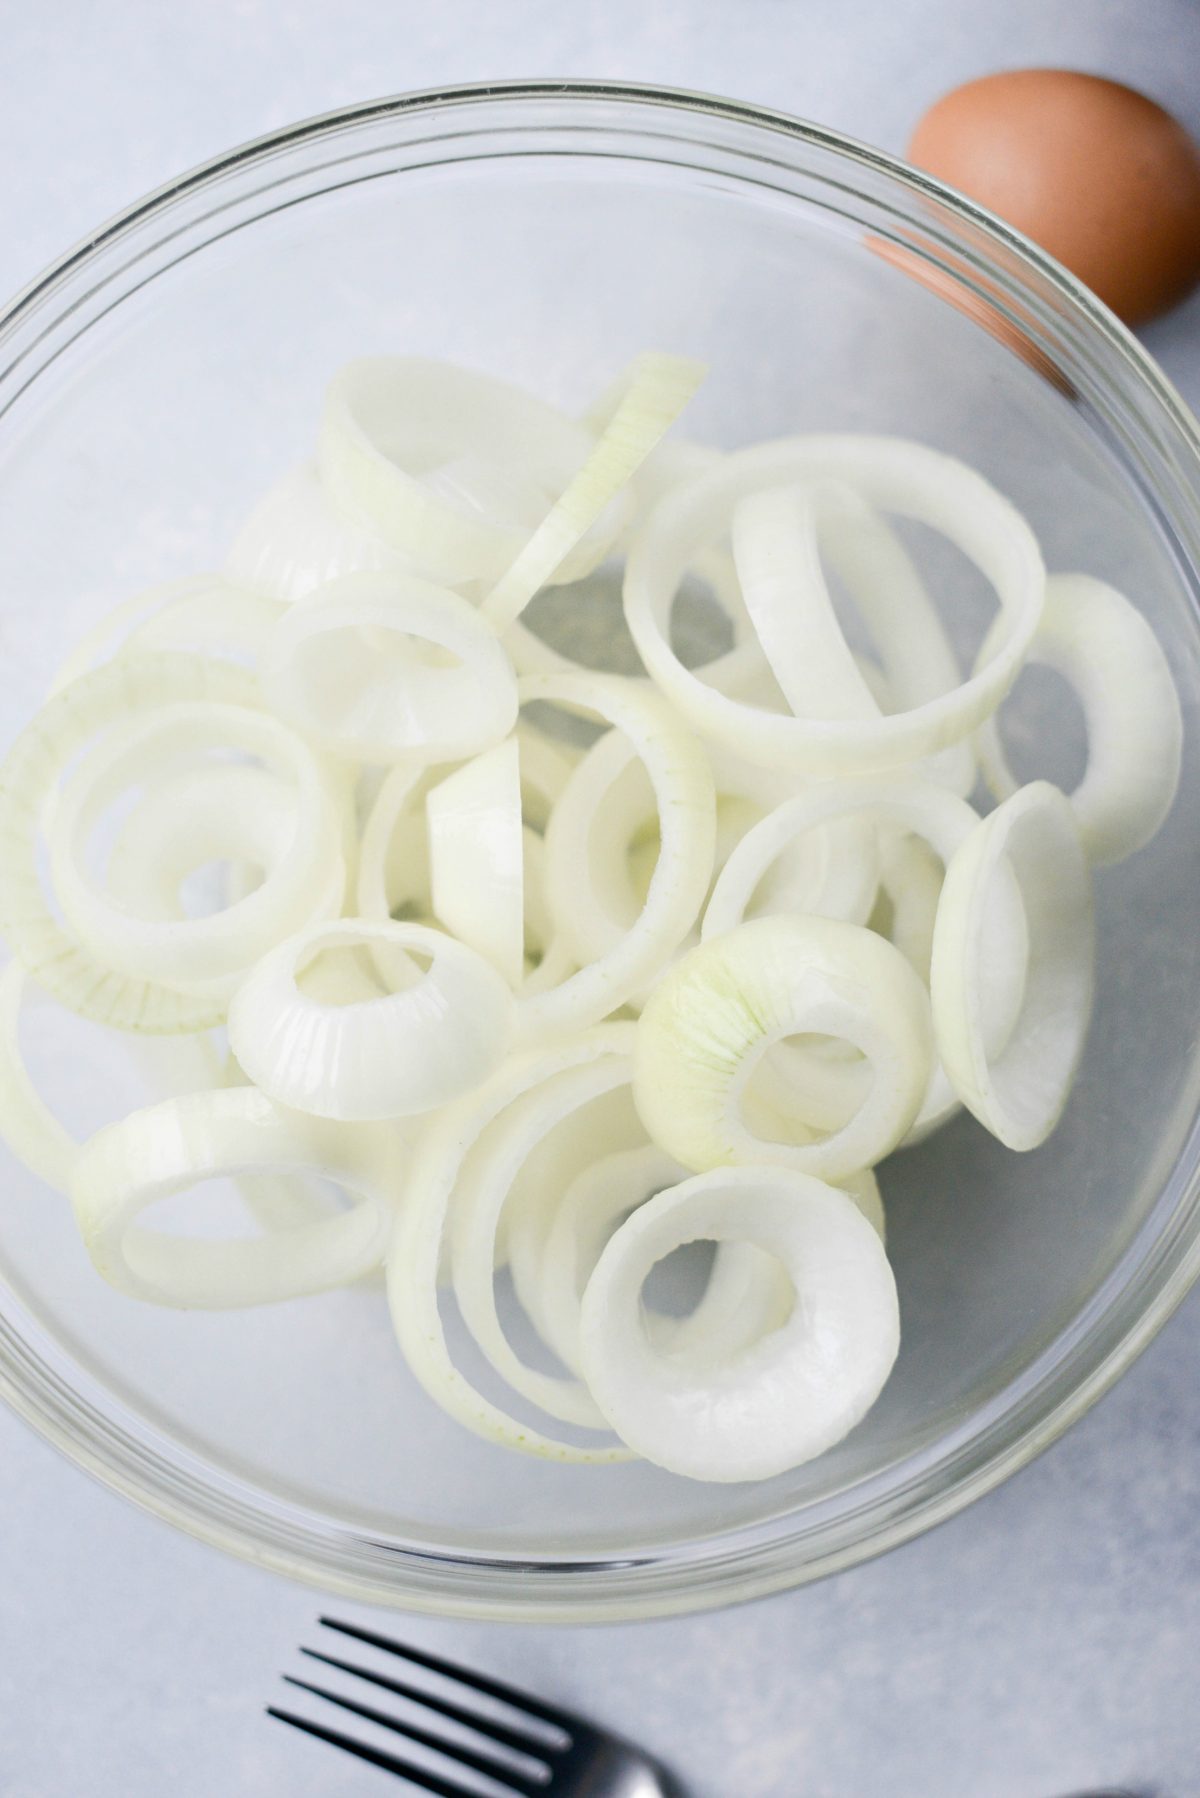 thick cut onions in a bowl